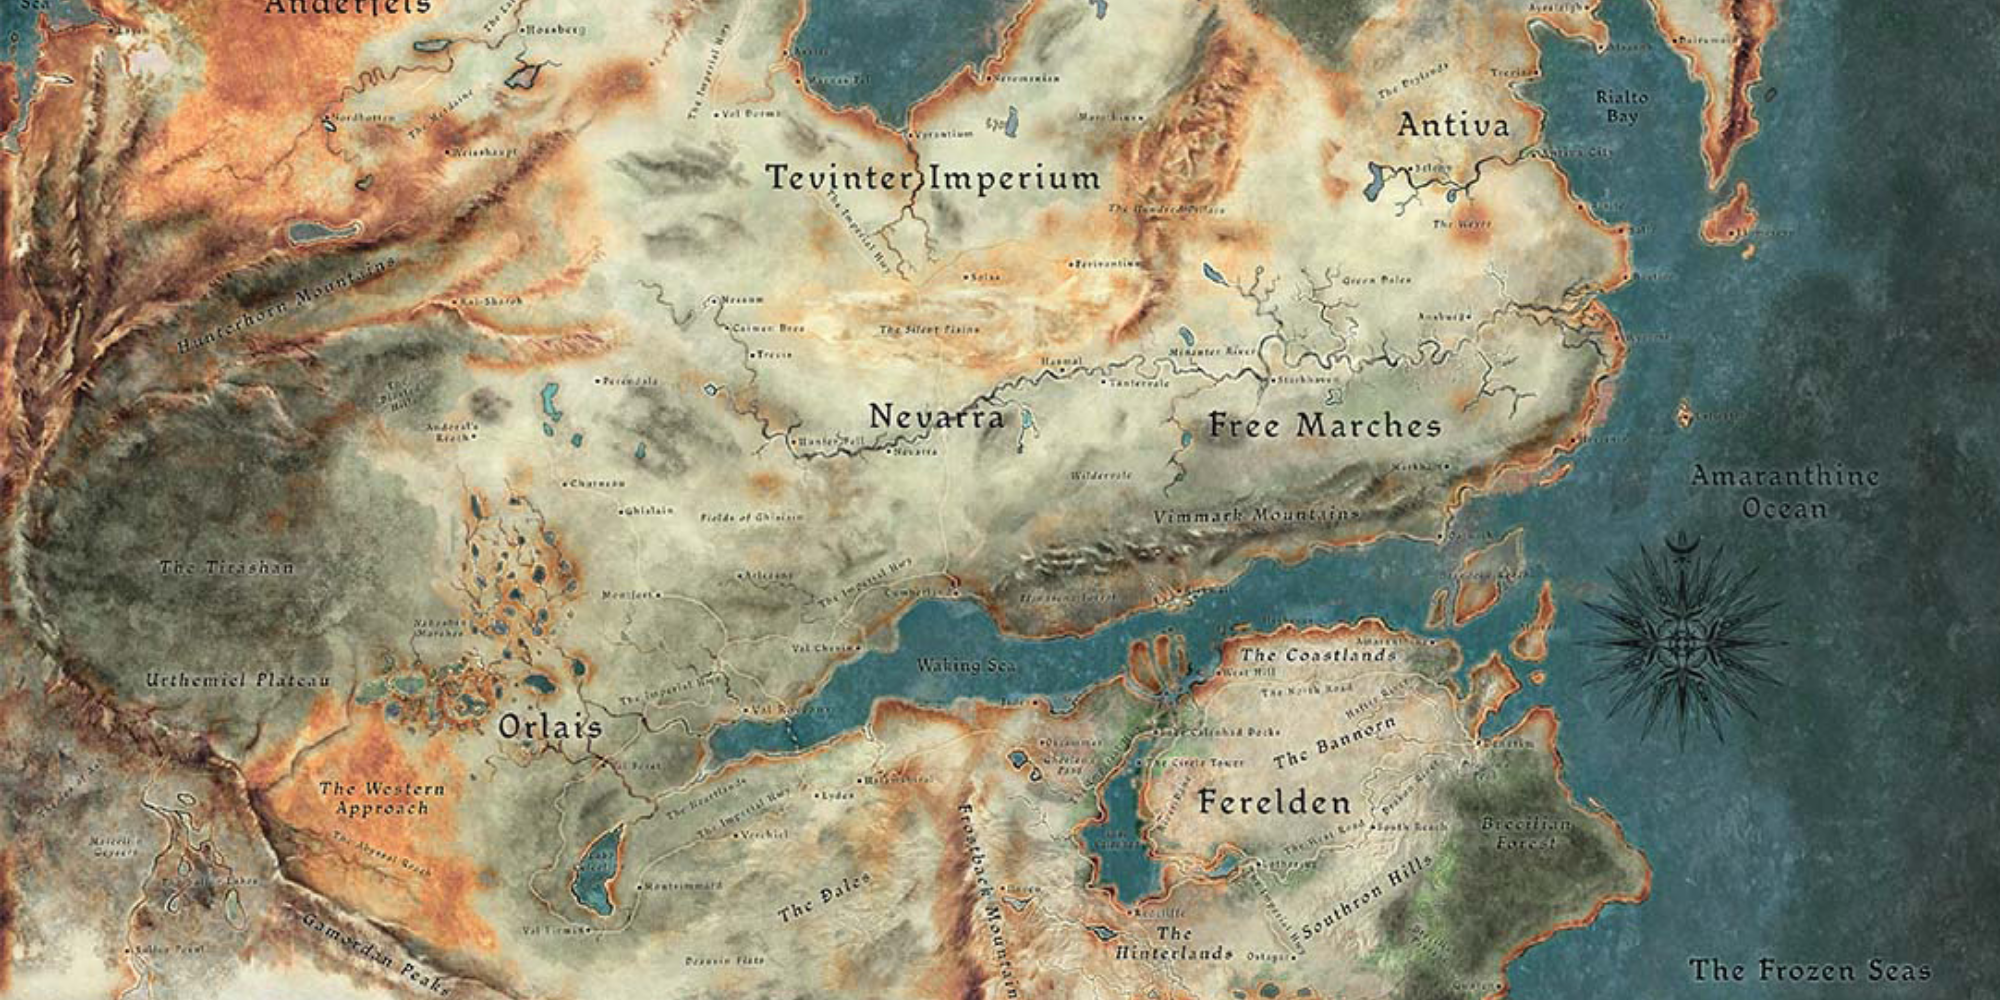 Dragon Age - Map of Thedas with names of countries